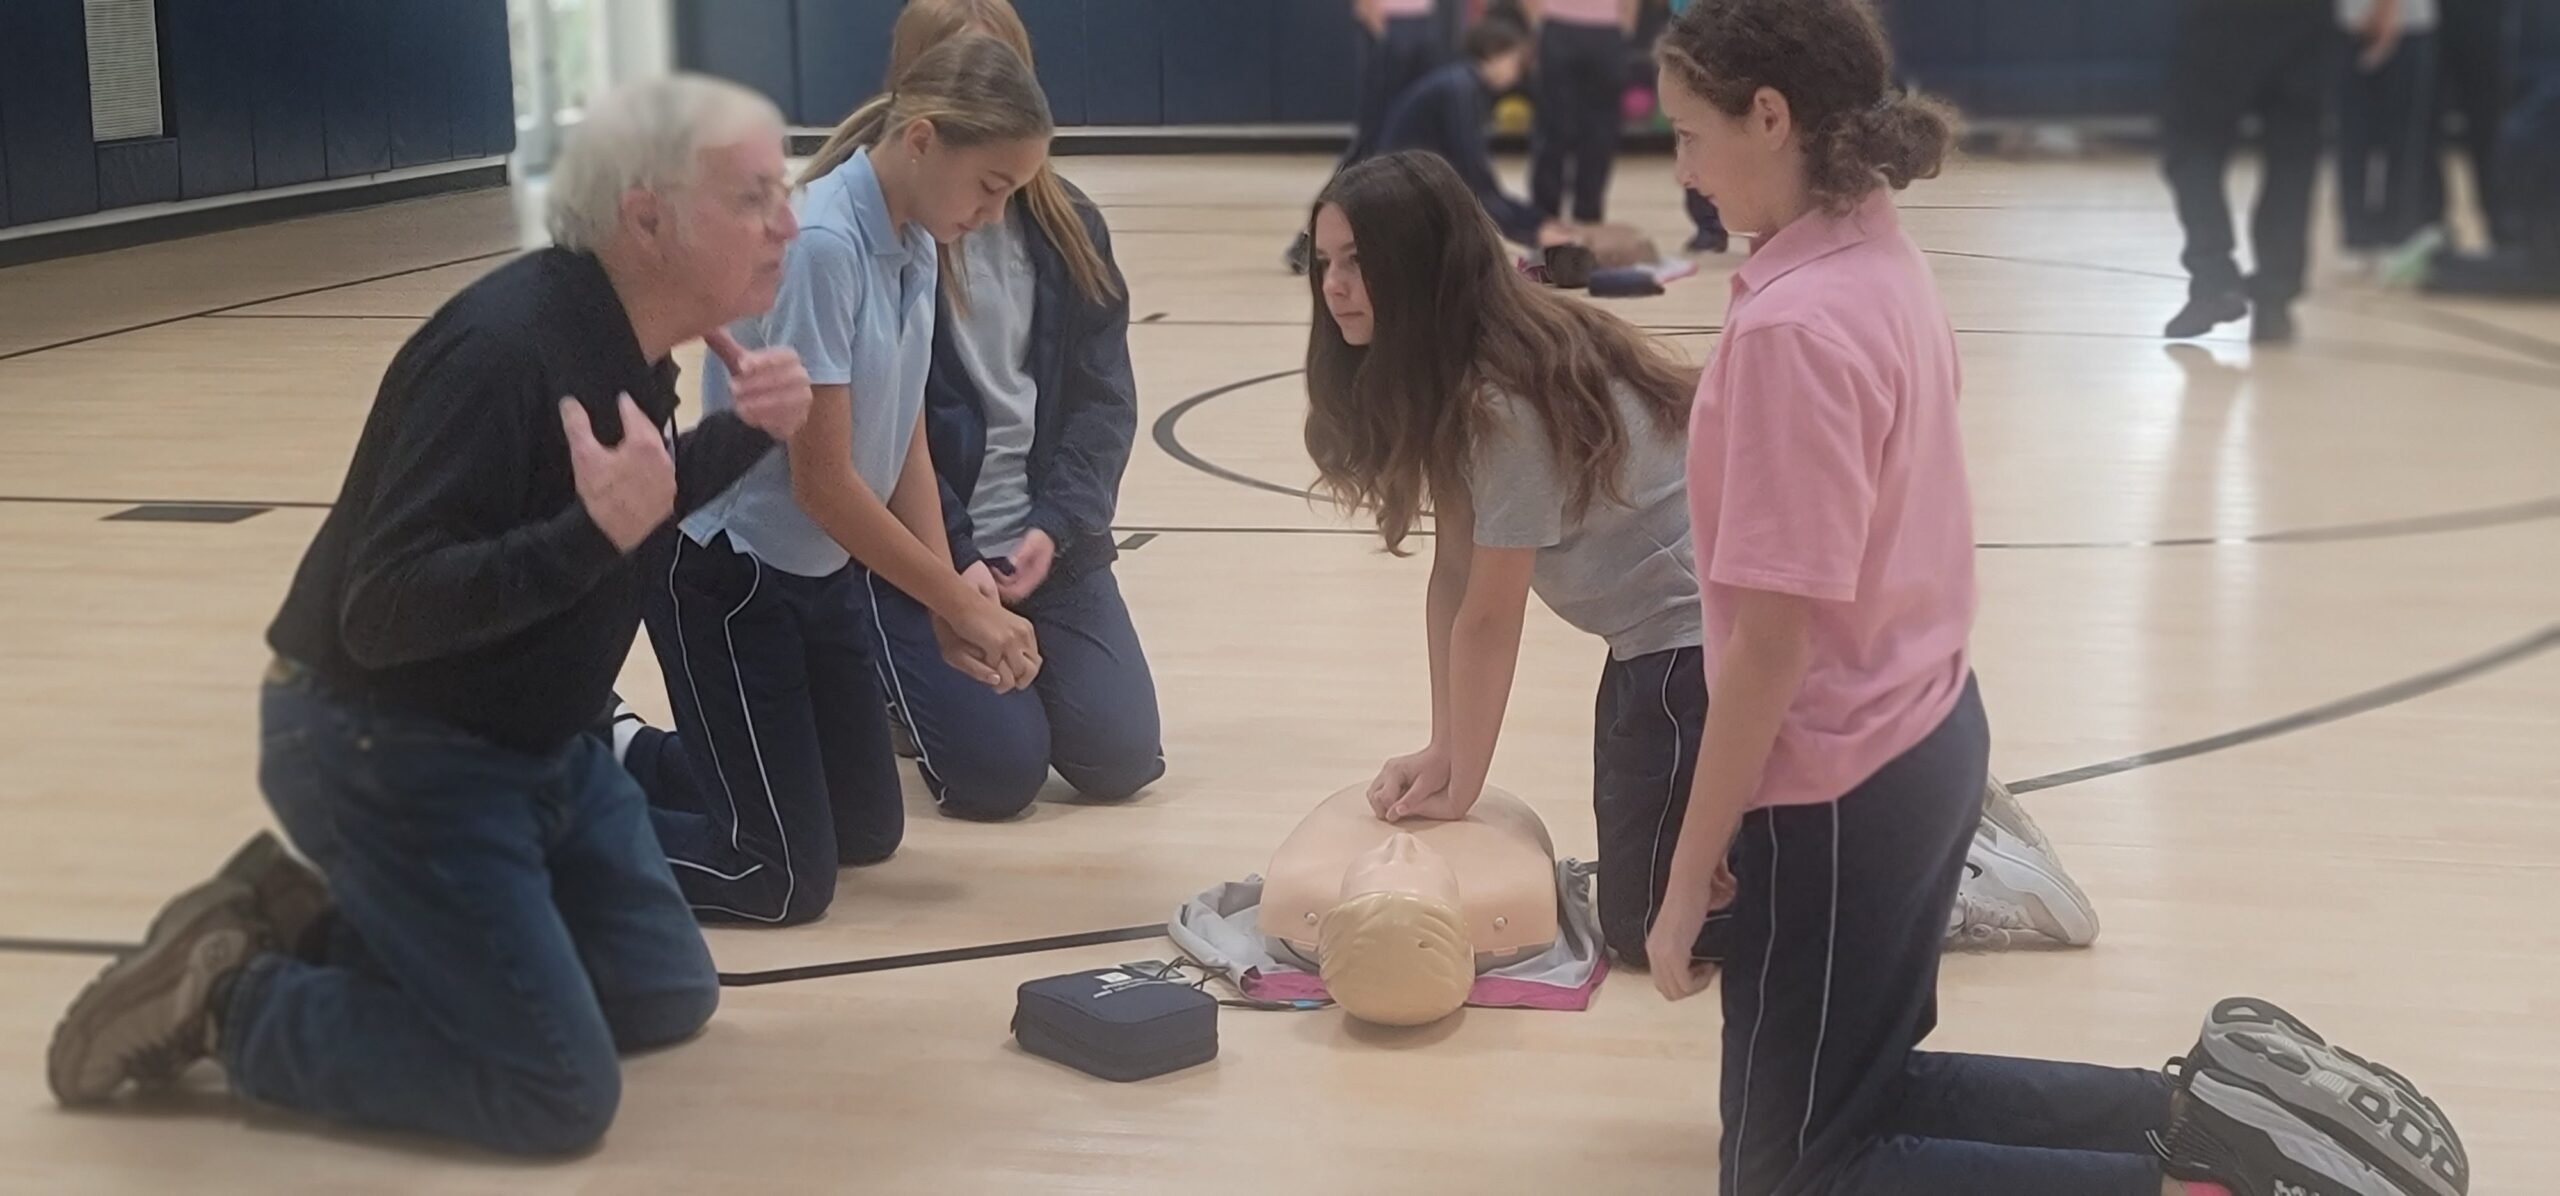 Students in Our Lady of the Hamptons Prep 7 health education class of Elyse Curro received instruction in CPR training with help from the  Southampton Village Ambulance, led by
Joseph Herley. COURTESY OUR LADY OF THE HAMPTONS